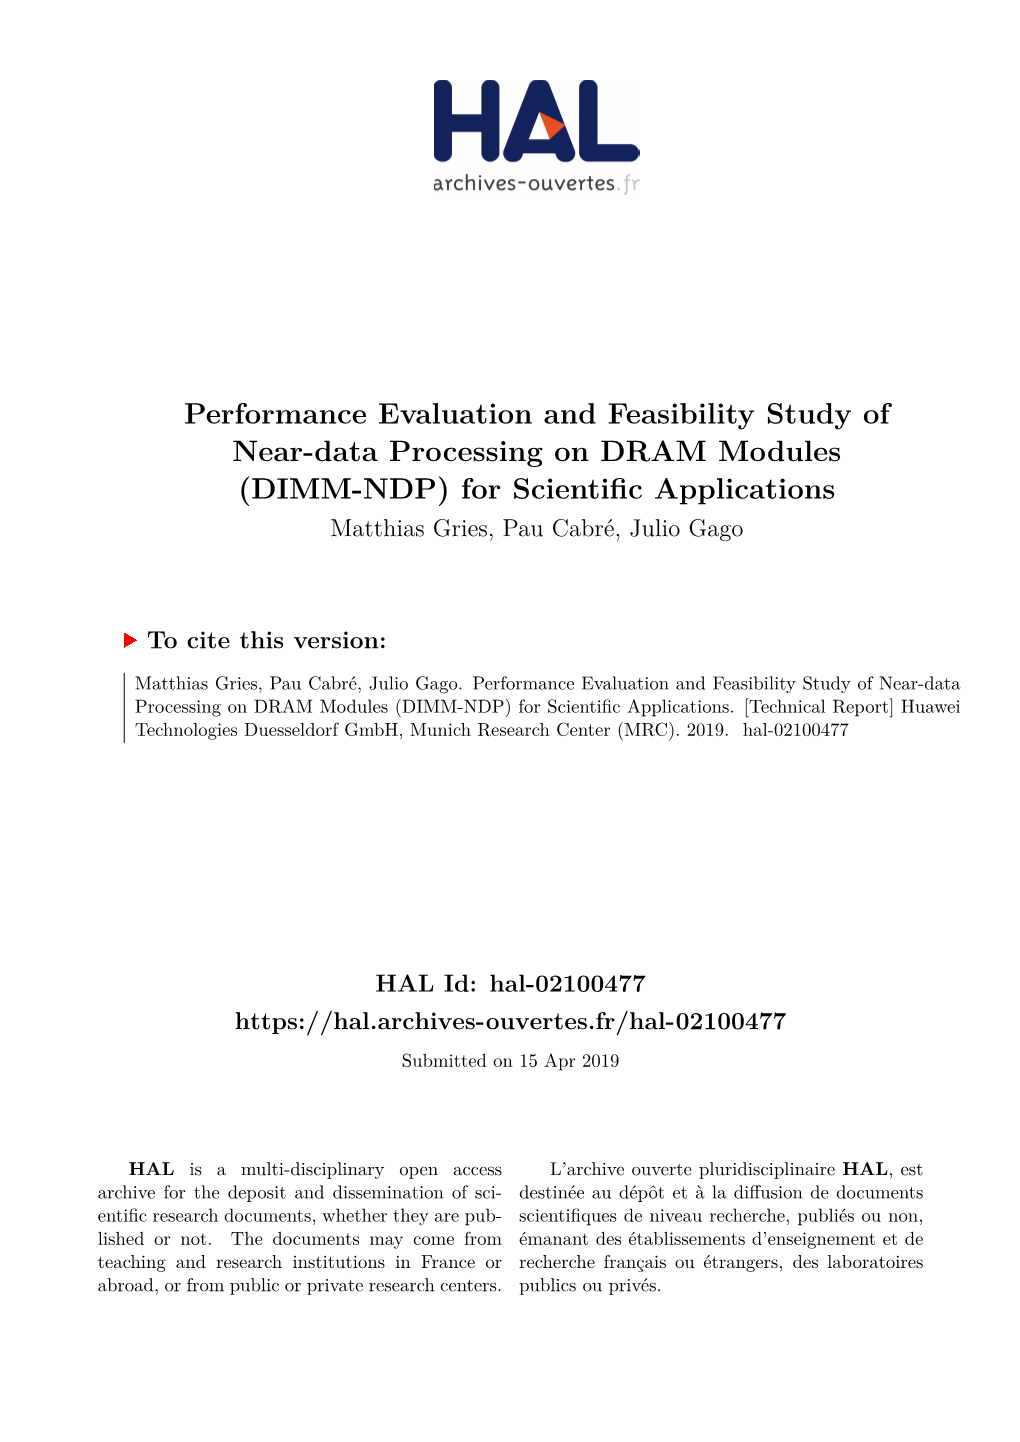 Performance Evaluation and Feasibility Study of Near-Data Processing on DRAM Modules (DIMM-NDP) for Scientific Applications Matthias Gries, Pau Cabré, Julio Gago